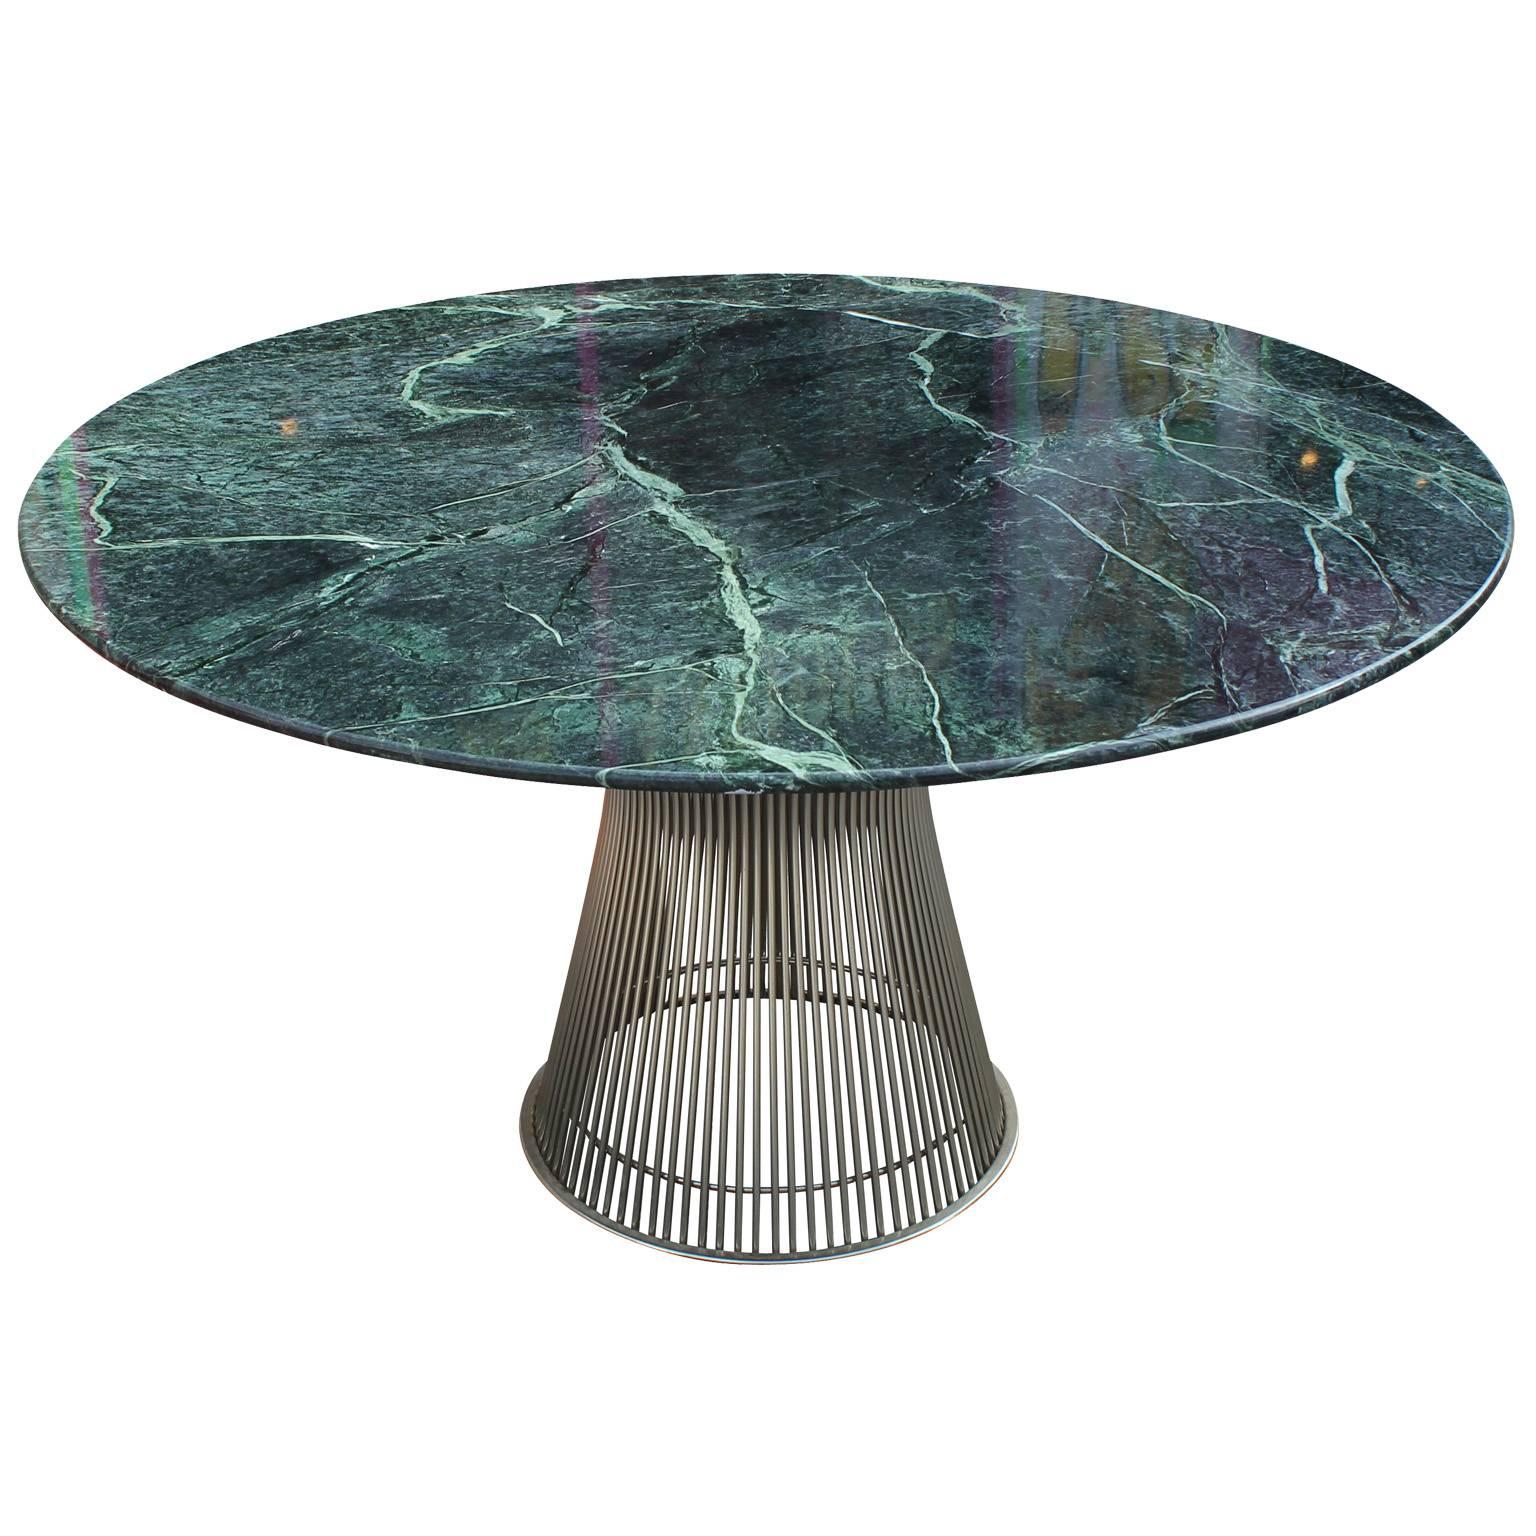 Iconic Warren Platner Dining Table with Green Marble Top